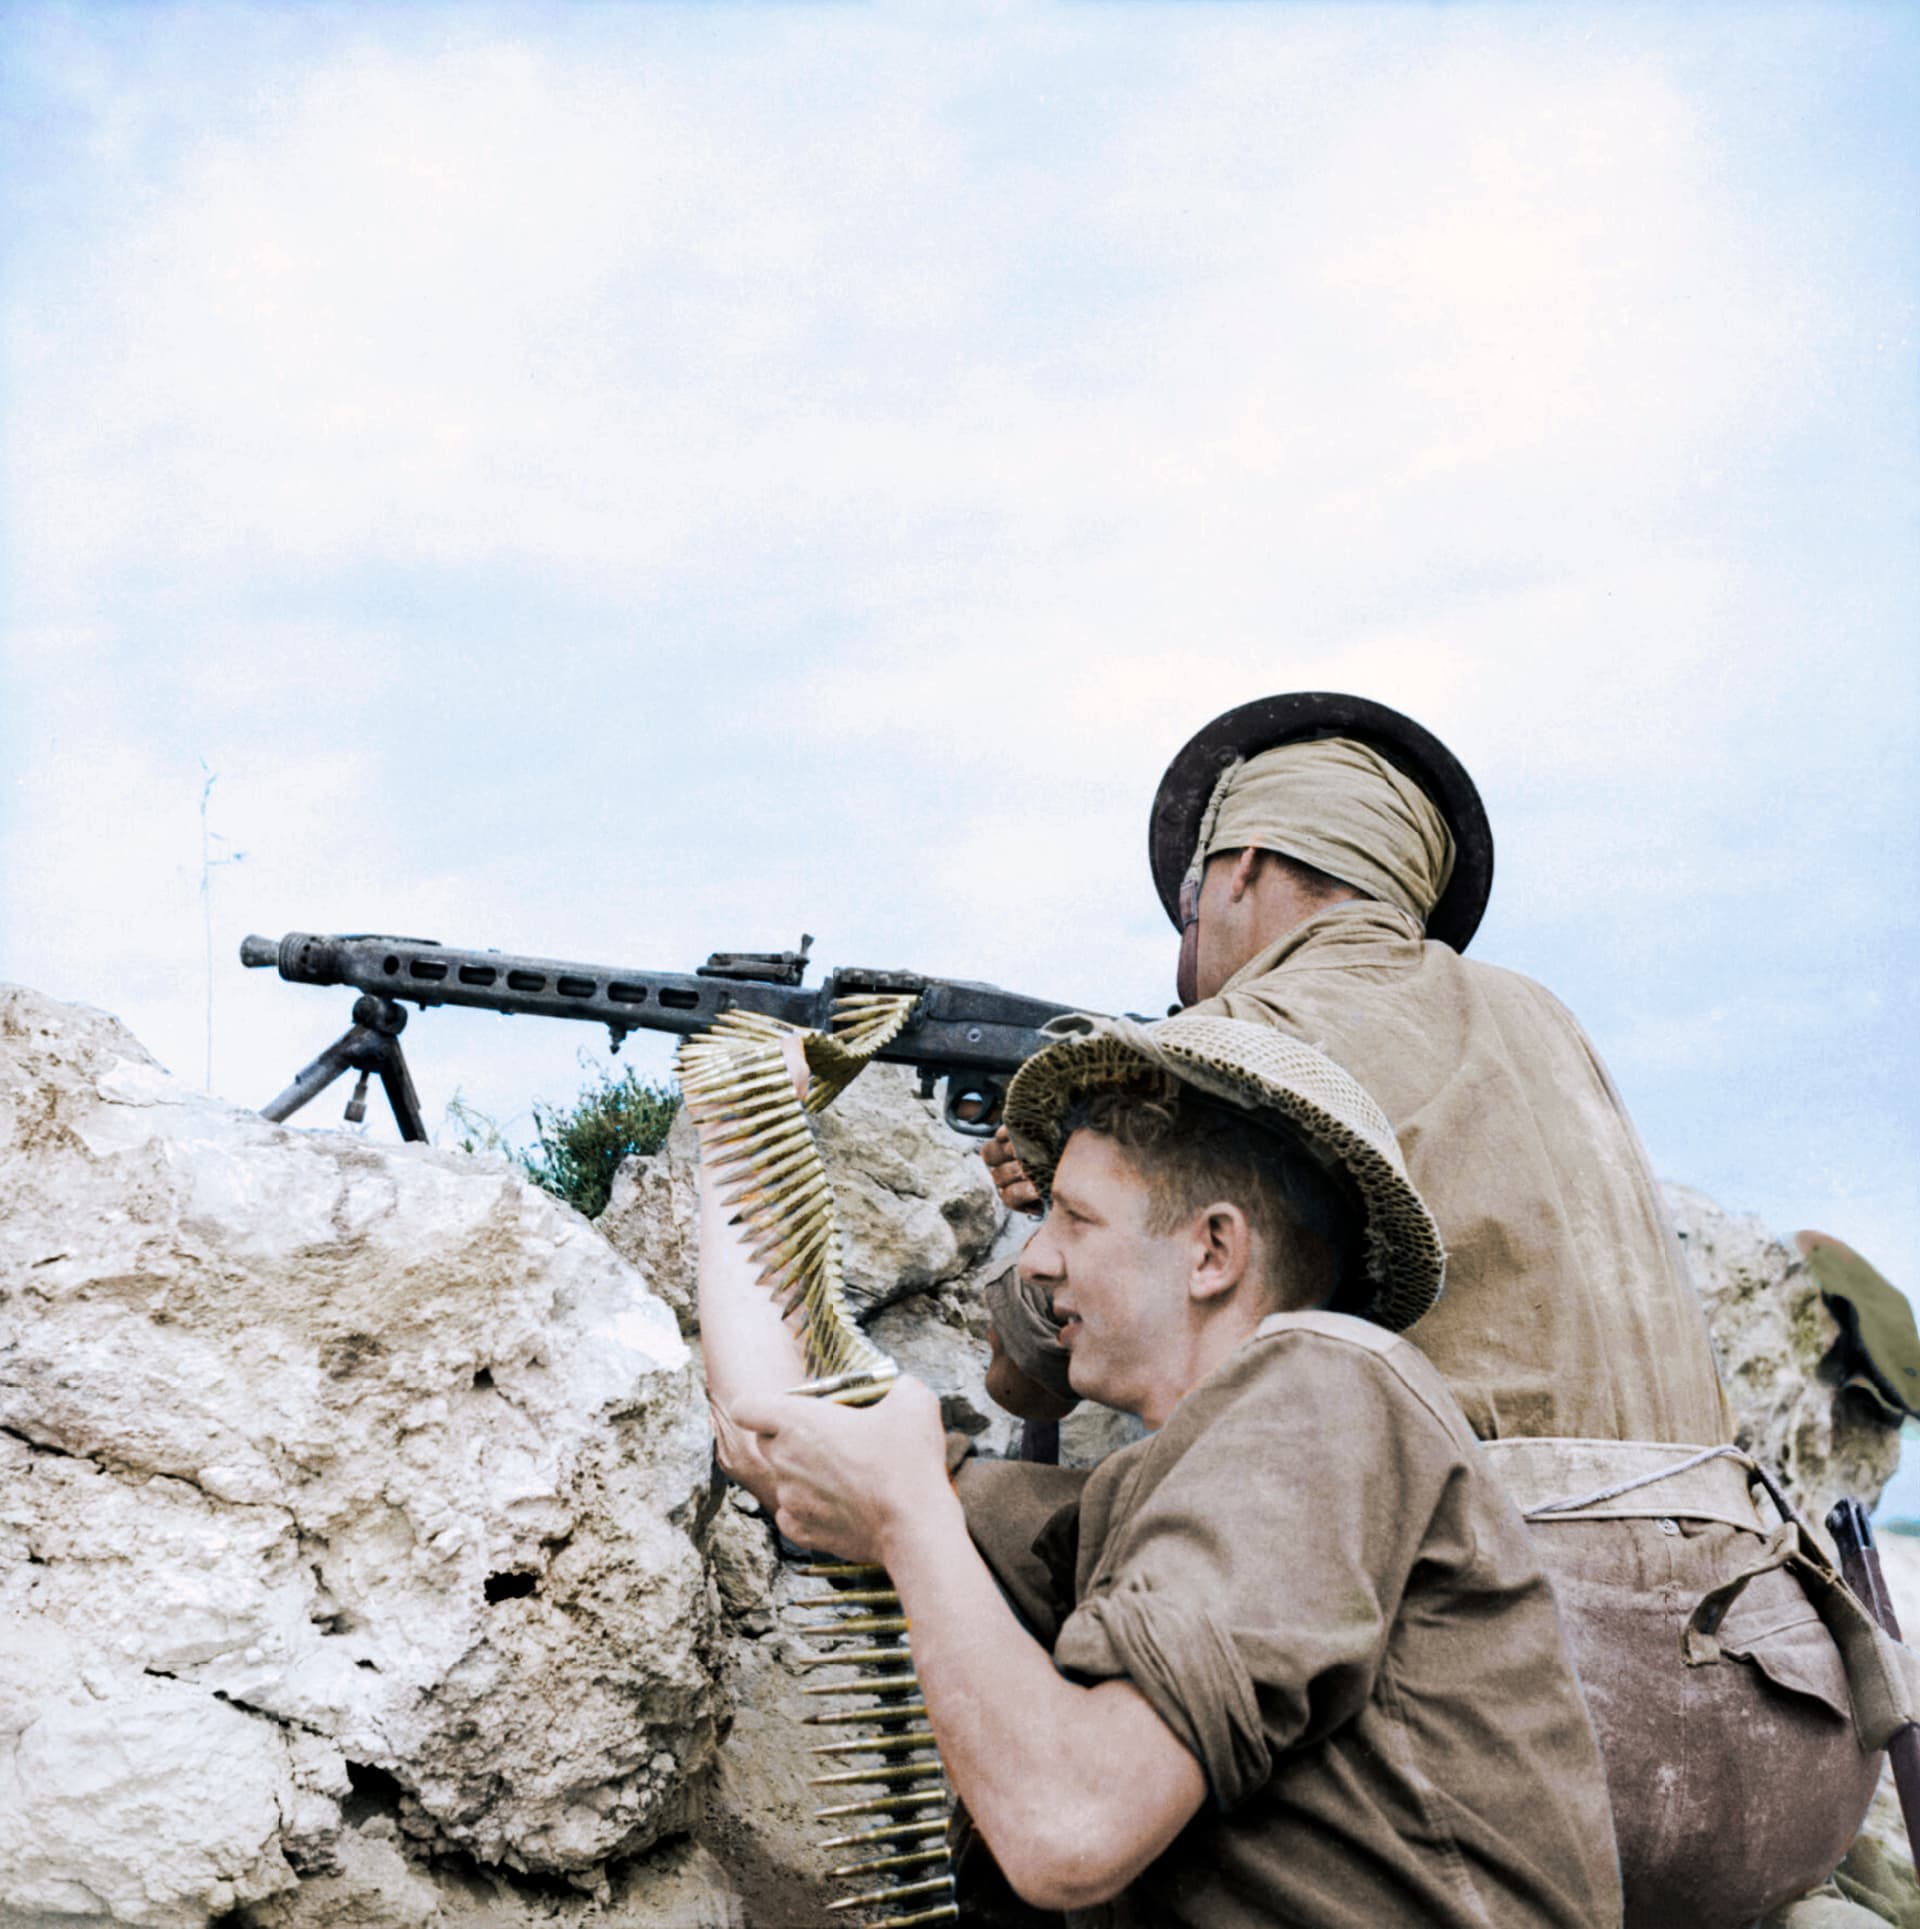 British_soldiers_in_Tunisia_during_World_War_2,27_April_1943(41975205770)